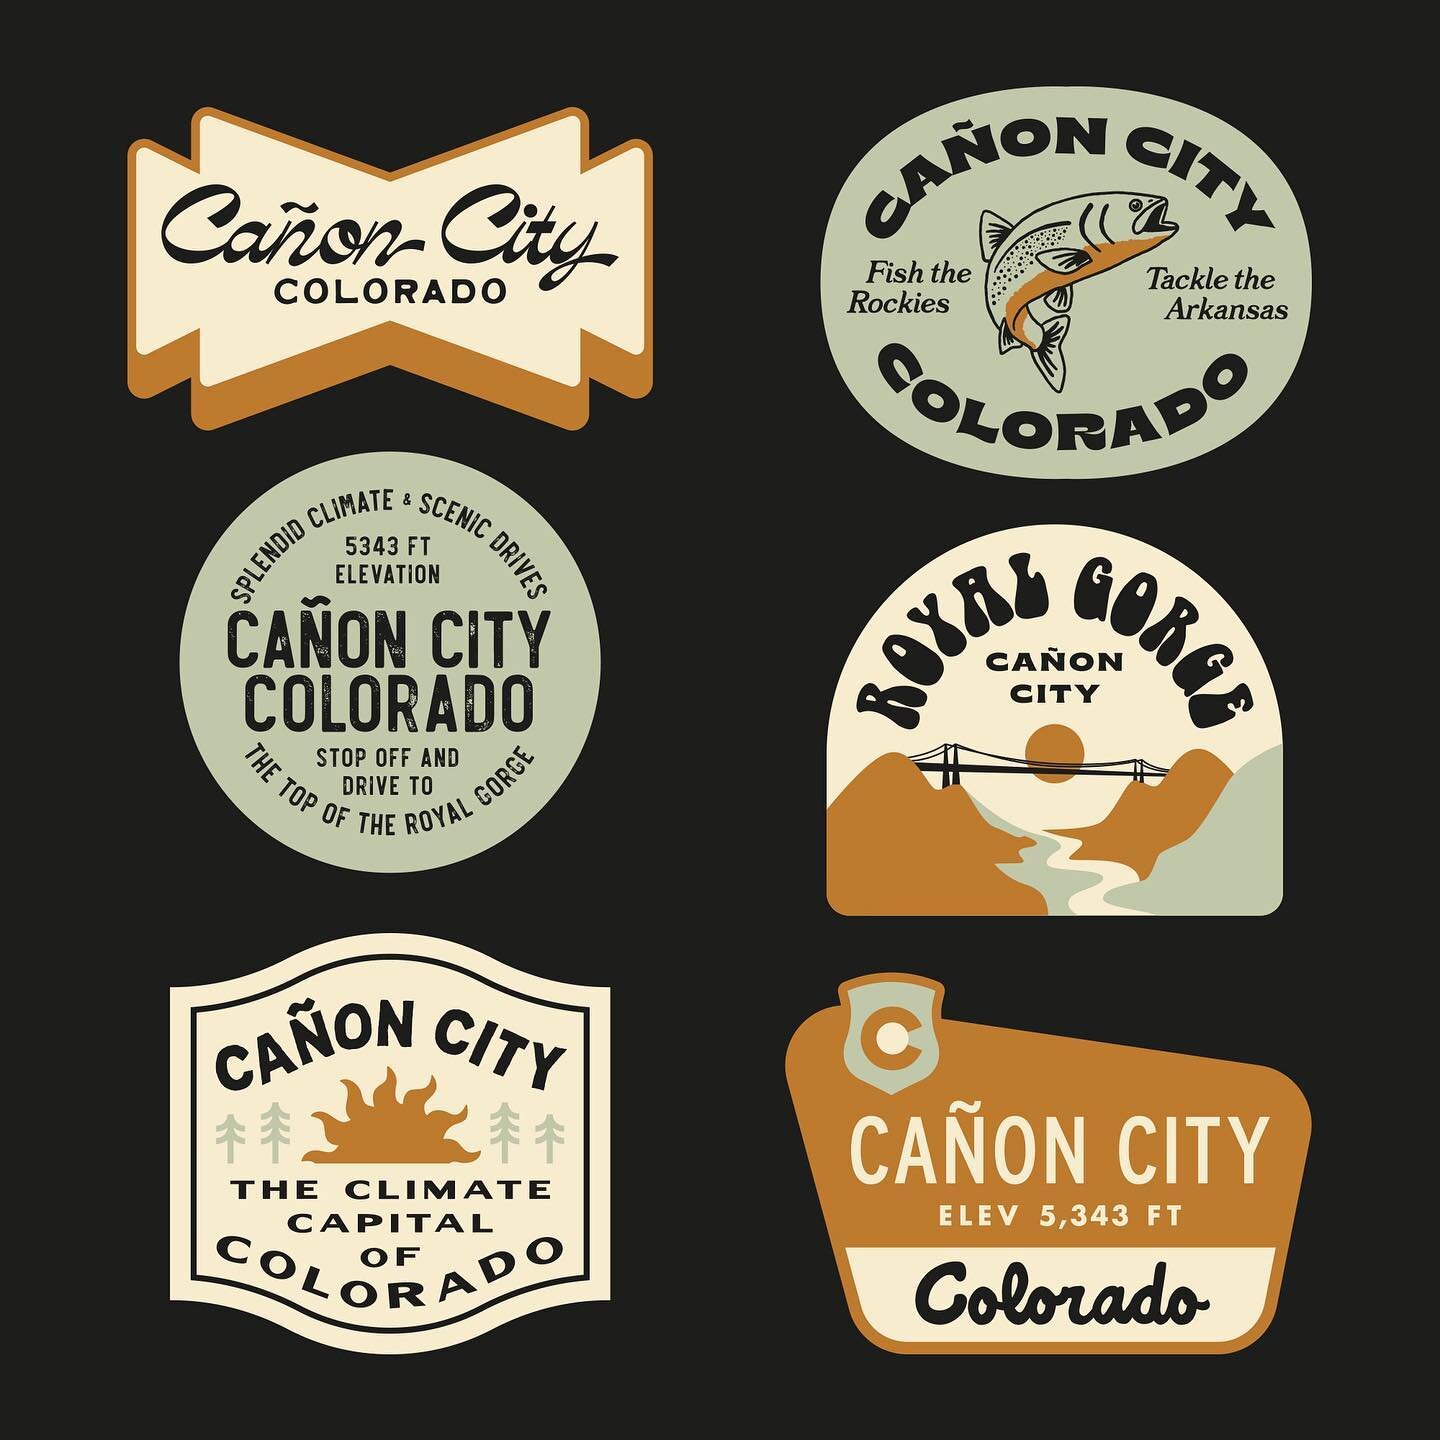 we're headed to Colorado for the holiday weekend so what better way to show my stoke then by creating some badge stickers. I wanted to create something inspired by Ca&ntilde;on City that wasn't the typical touristy look and feel. swipe through to see